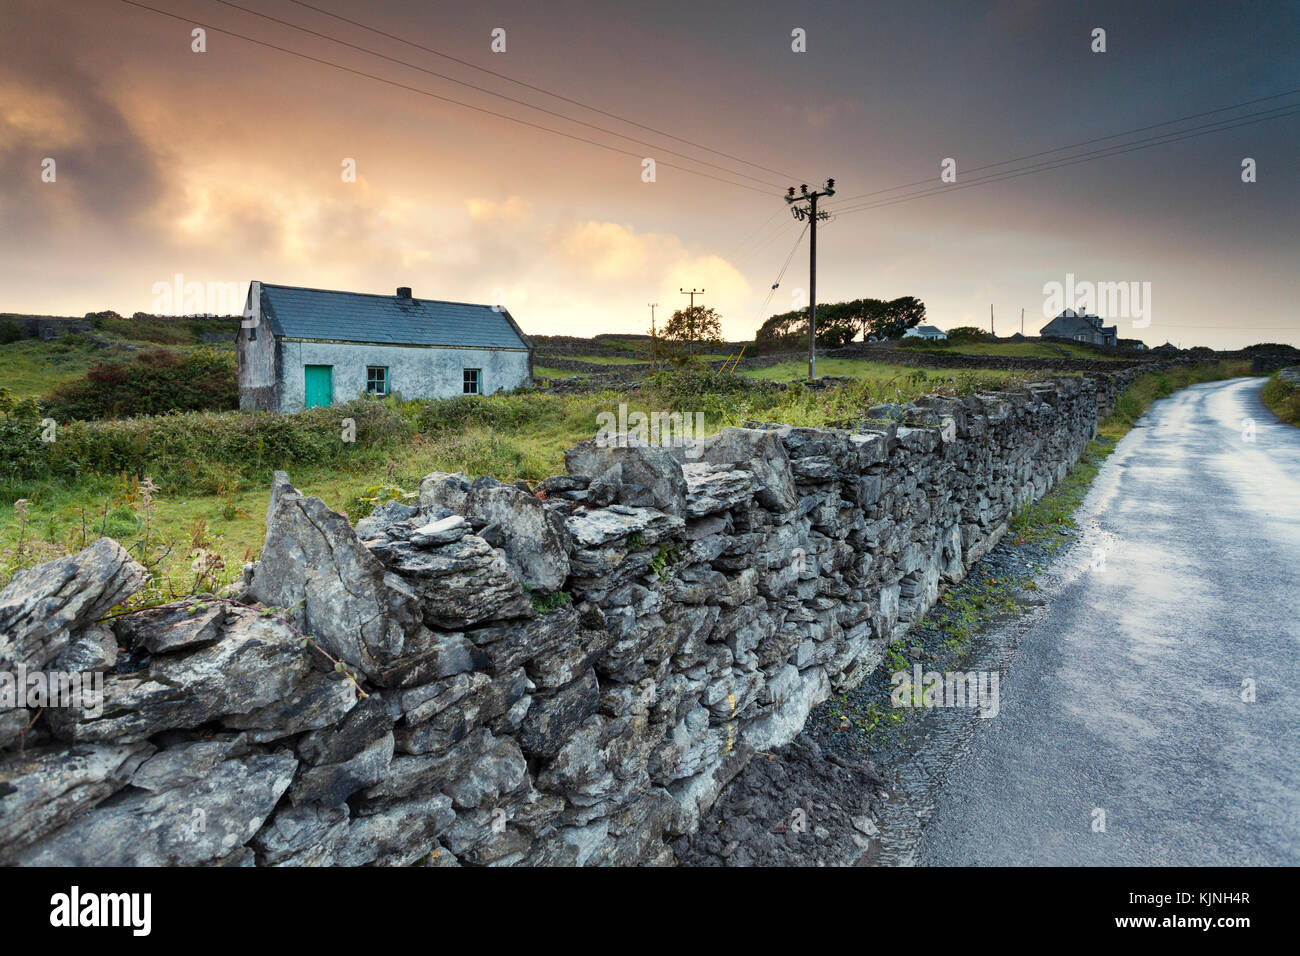 Scenic Landscape of a cottage on Árainn Mhór/Inis Mór (Inishmore), one of three islands in the Aran Islands, County Galway, Ireland. Stock Photo